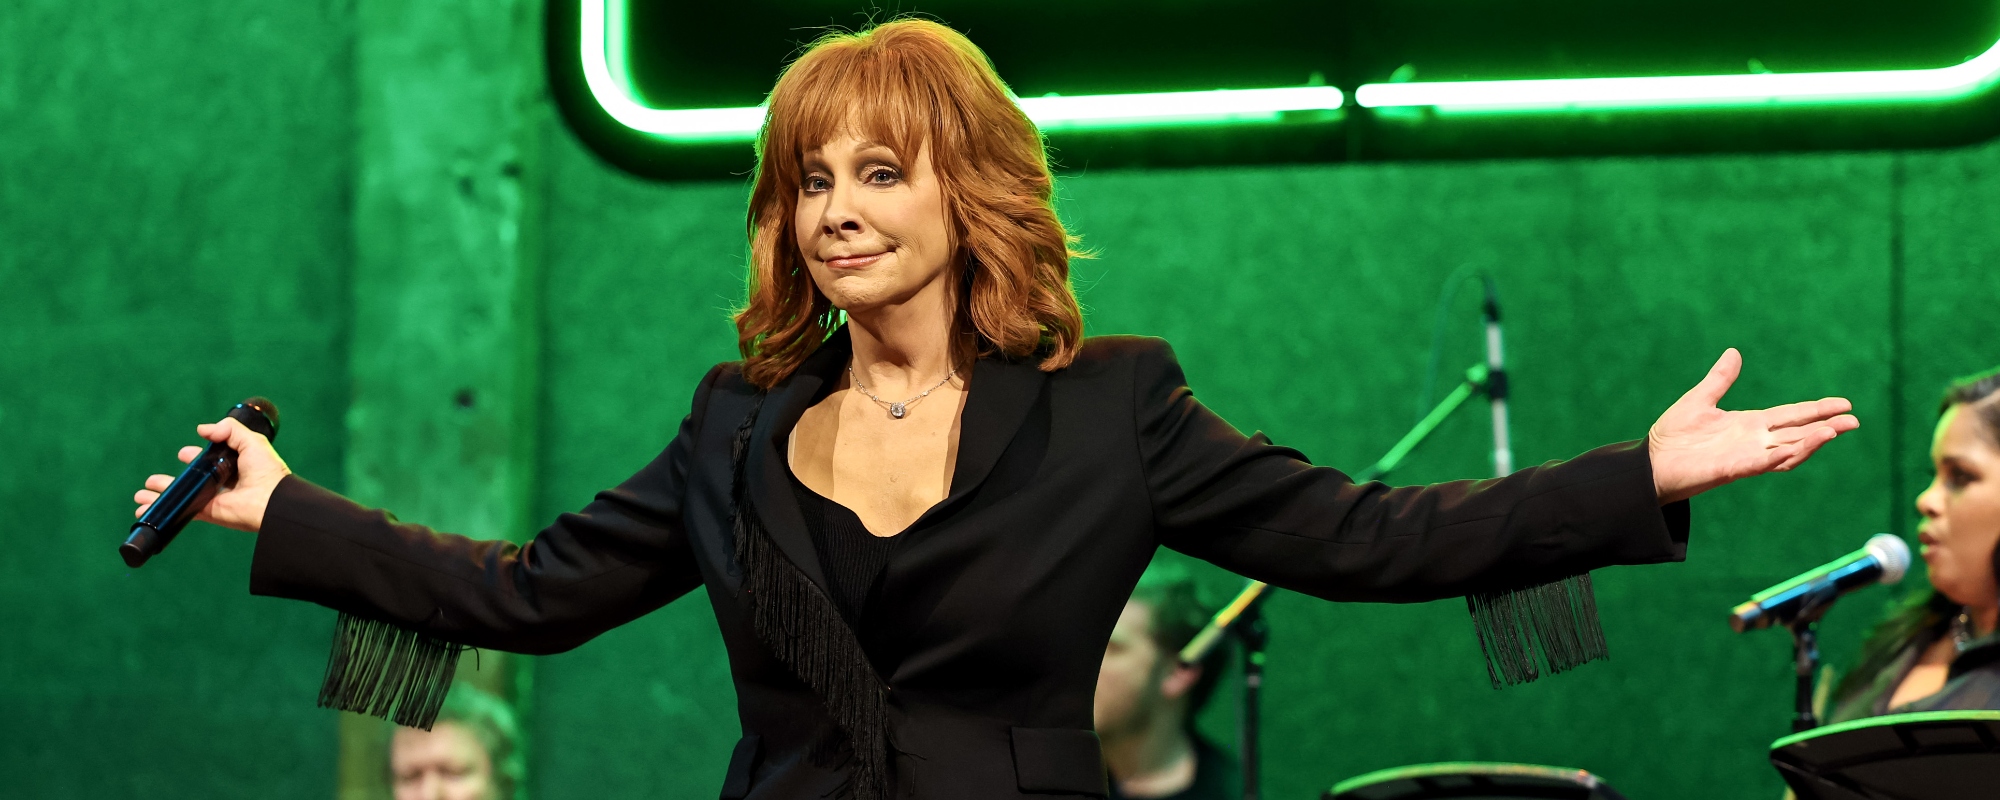 Fans Rush to Twitter to Wish Reba McEntire a Merry Christmas After She Sends Holiday Cheer in Festive Clip